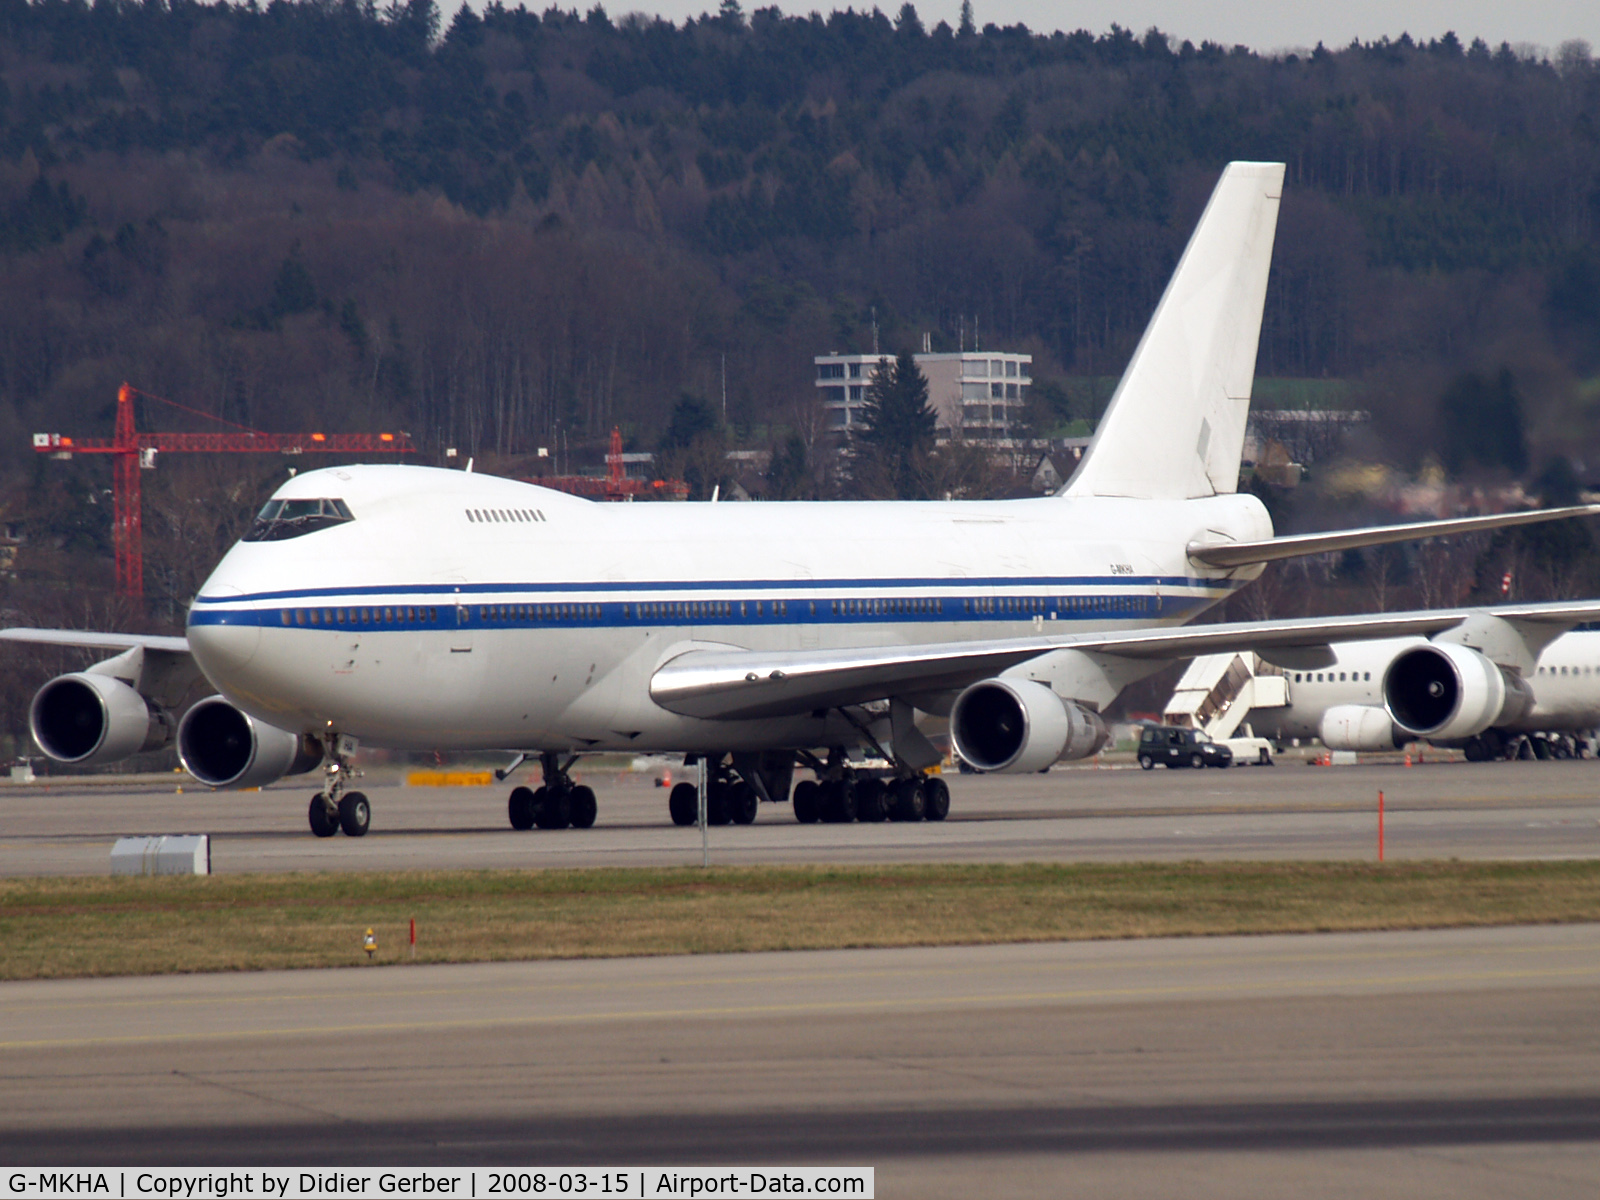 G-MKHA, 1983 Boeing 747-2J6B C/N 23071, Special visitor to LSZH